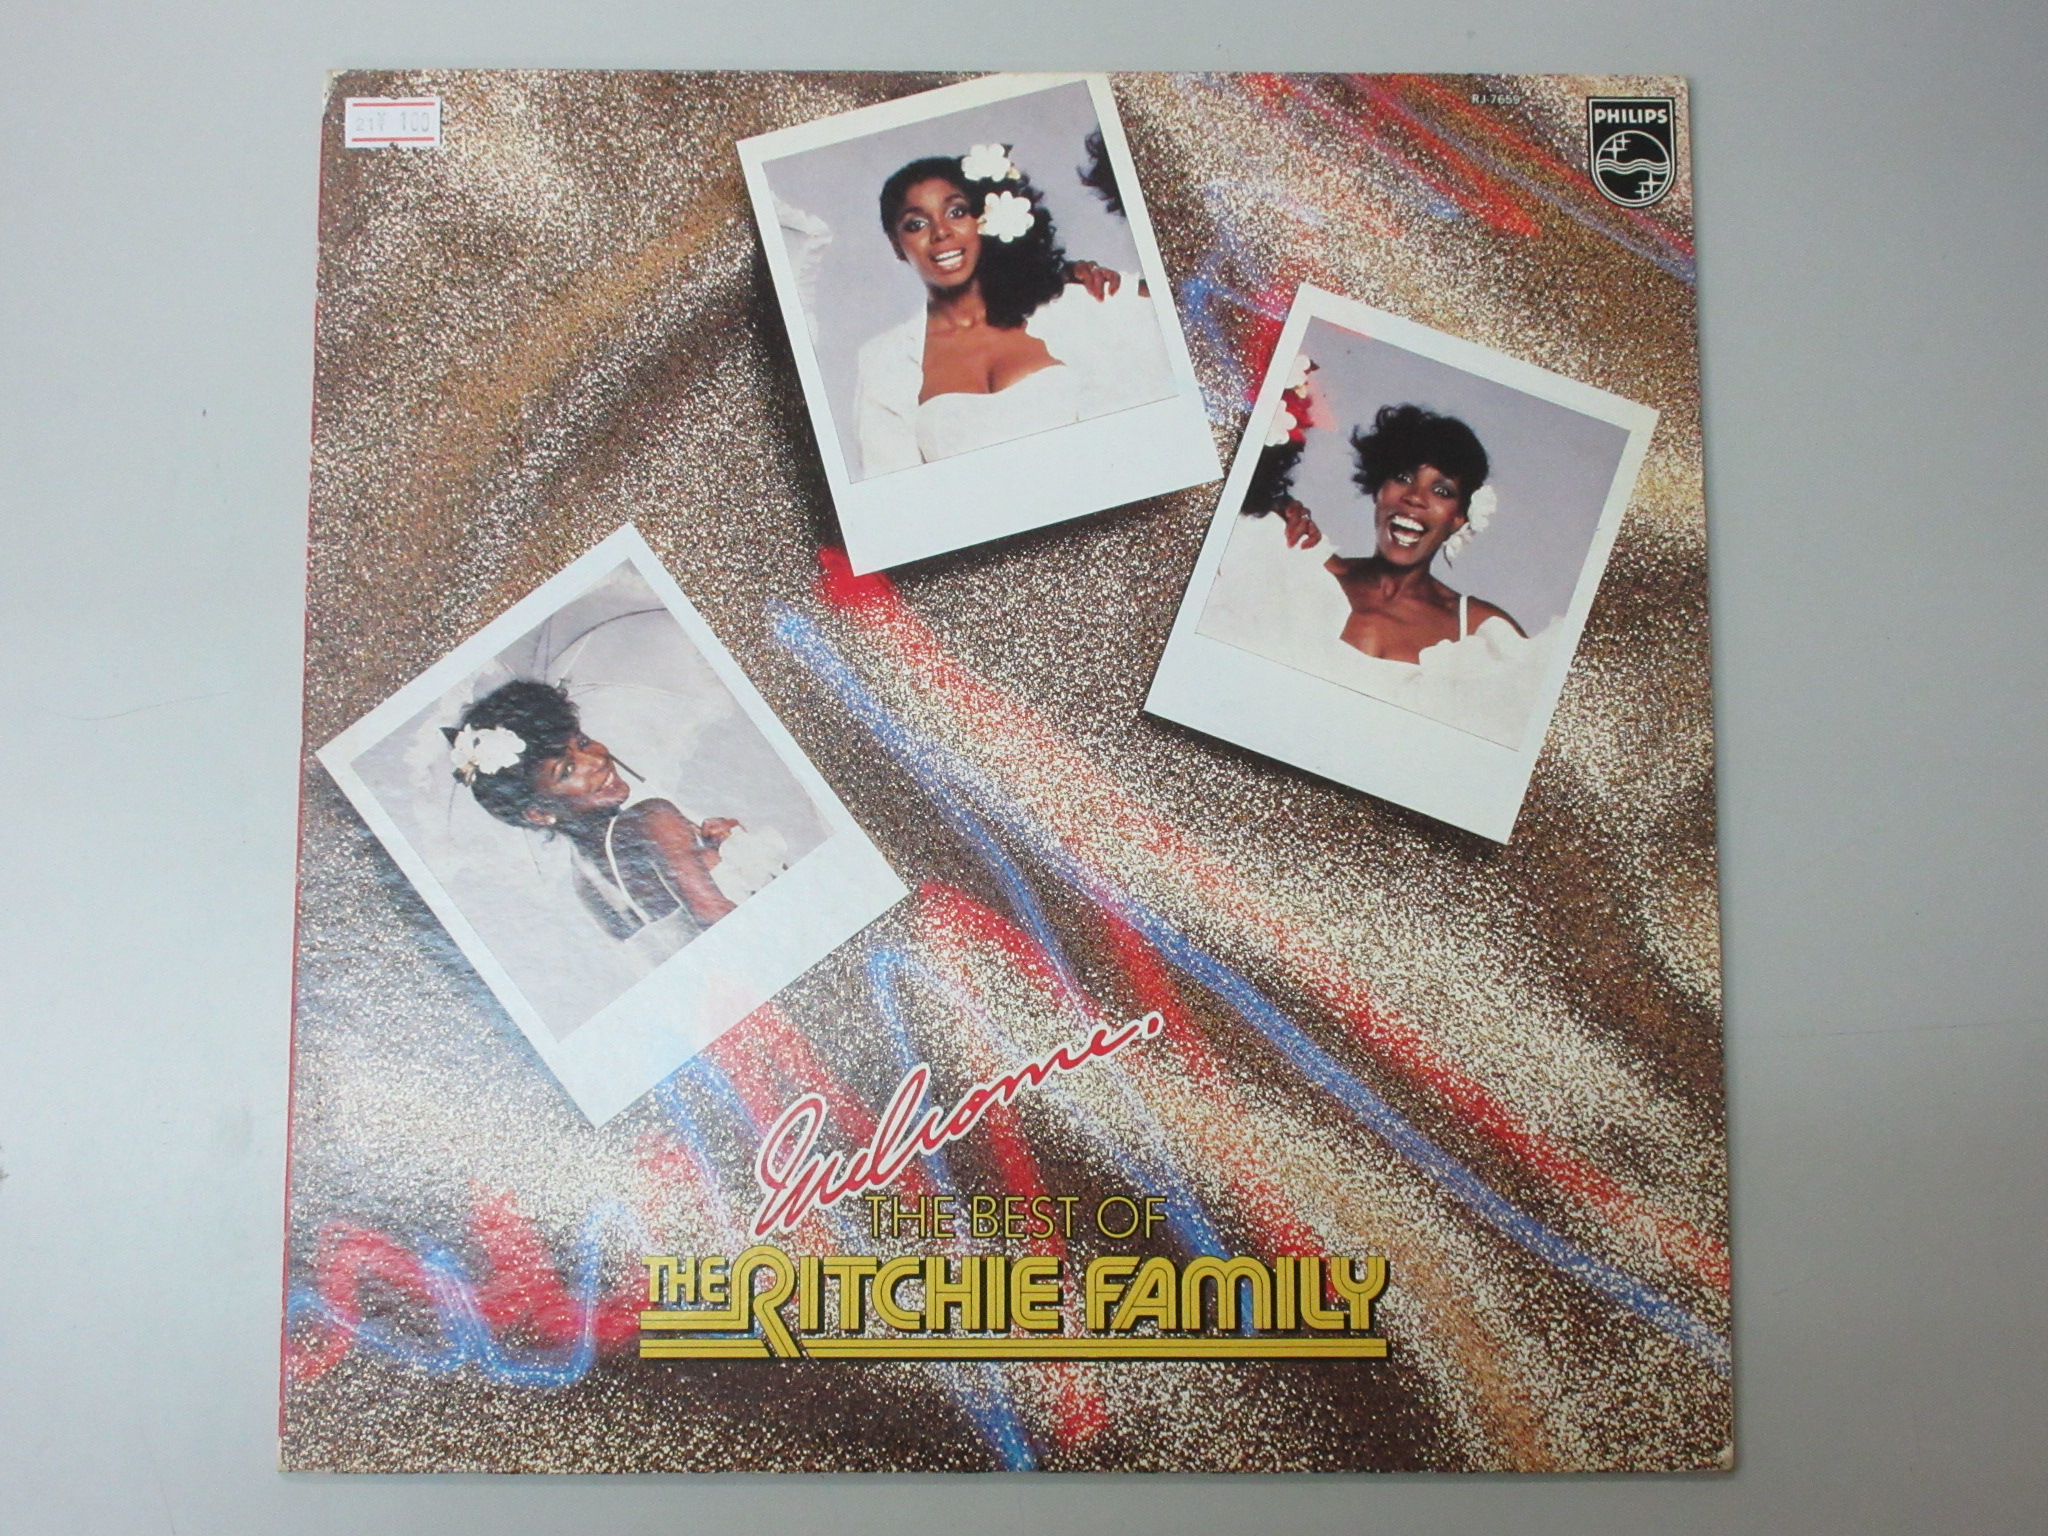 The Ritchie Family - Welcome, The Best Of Ritchie Family[RJ-7659]